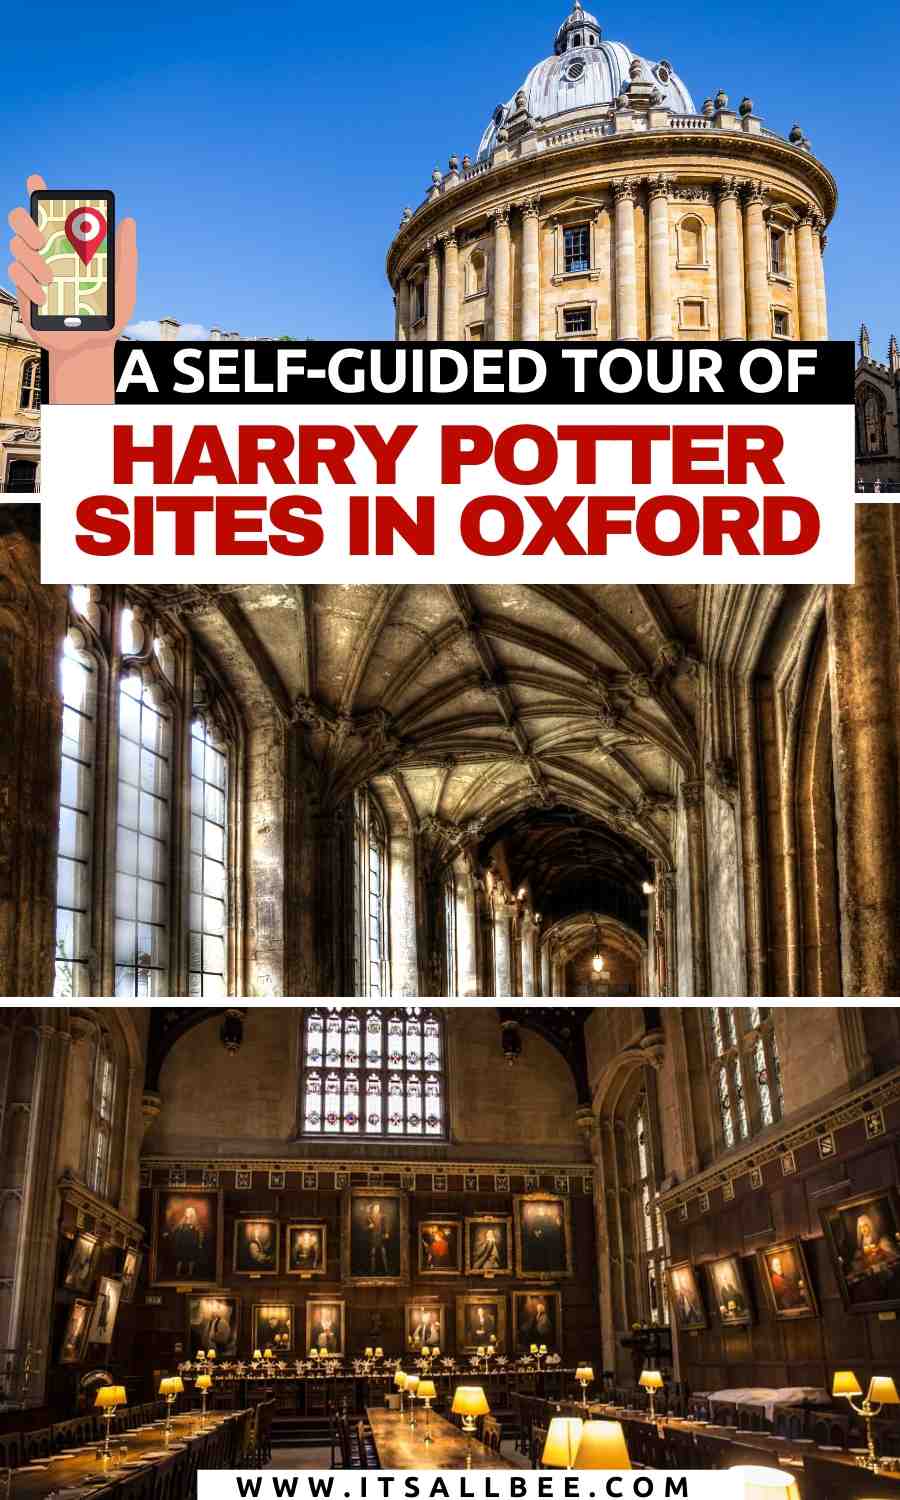 Harry Potter sites in Oxford | Oxford Harry Potter sites